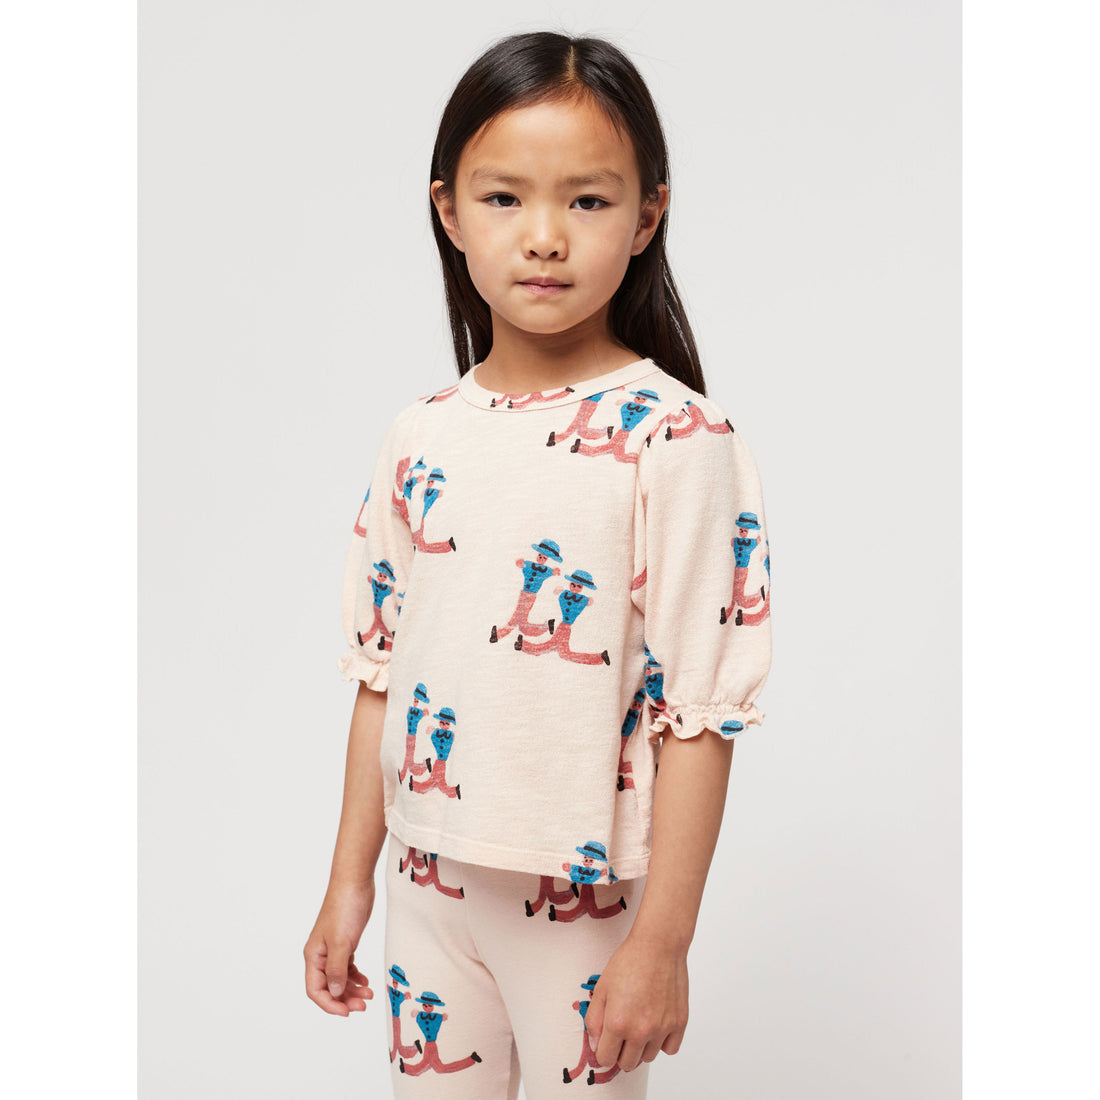 Bobo Choses Light Pink Dancing Giants All Over Puffed Sleeves T-Shirt